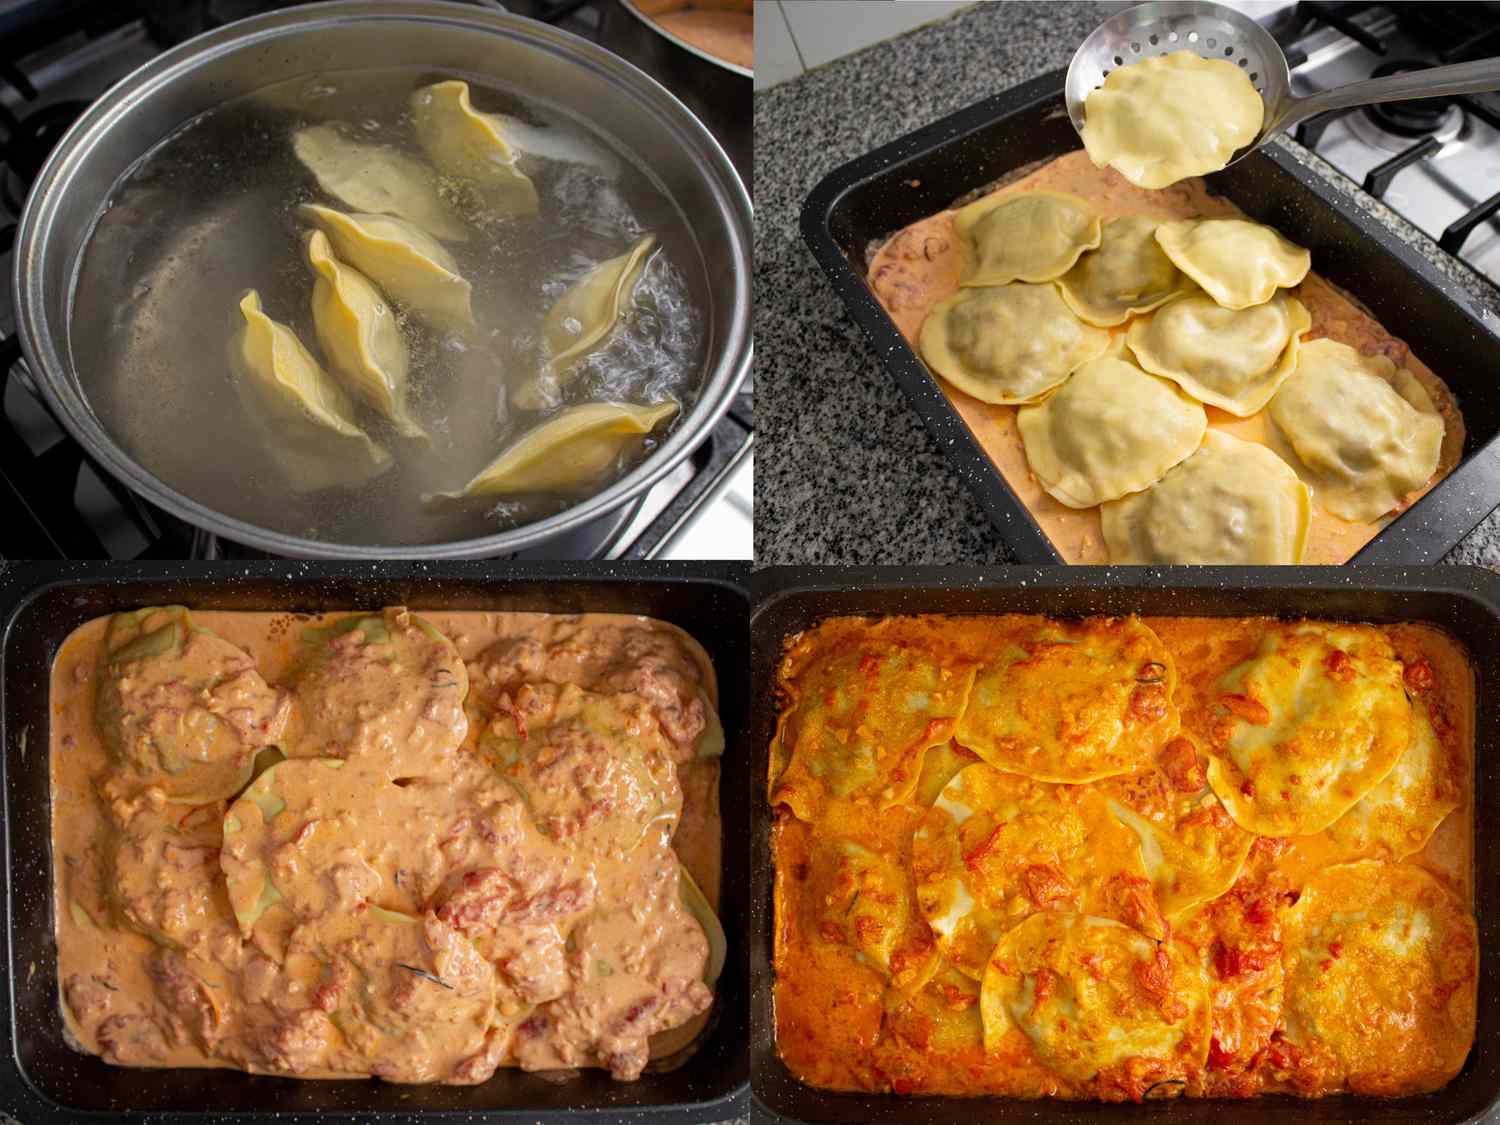 Four image collage of boiling, placing in casserole dish, and baking sorrentinos